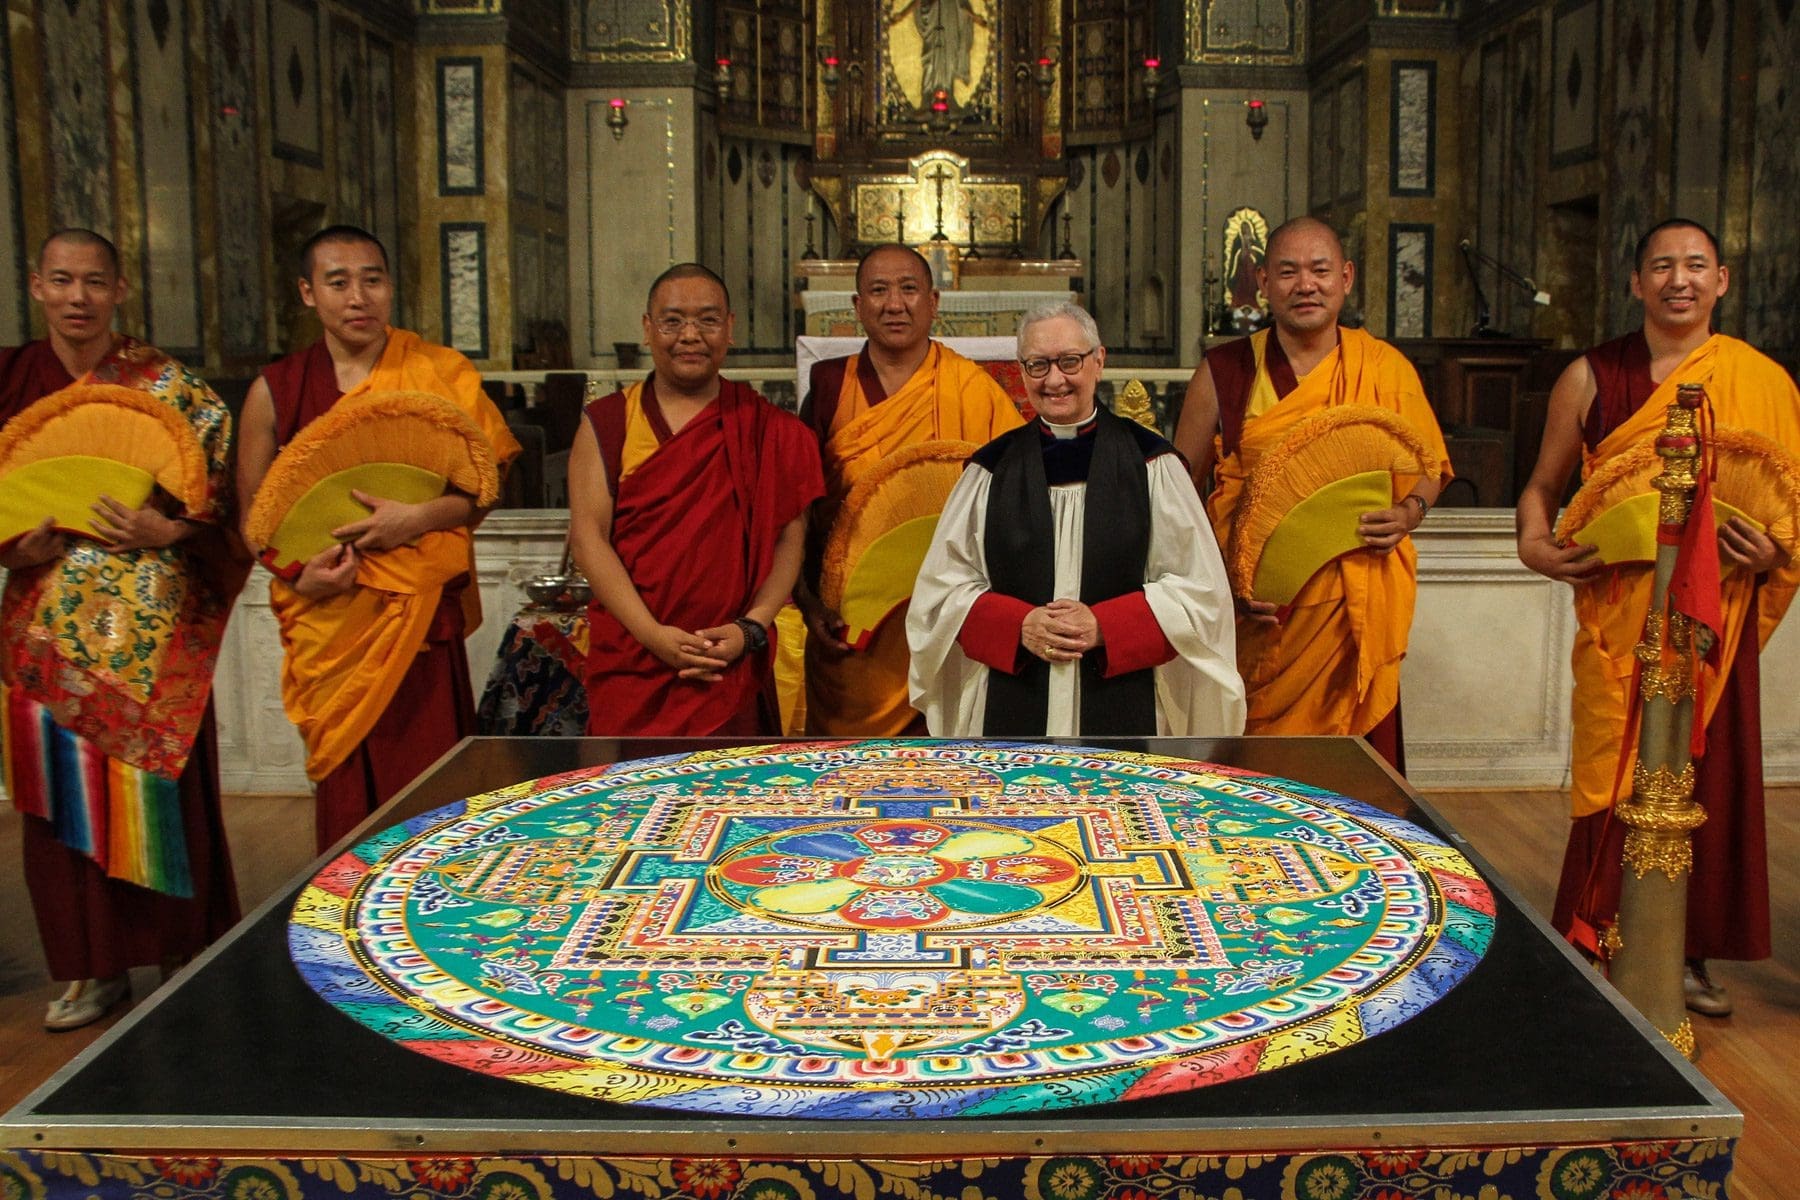 The monks and Dr. Guibord with the Mandala of Compassion